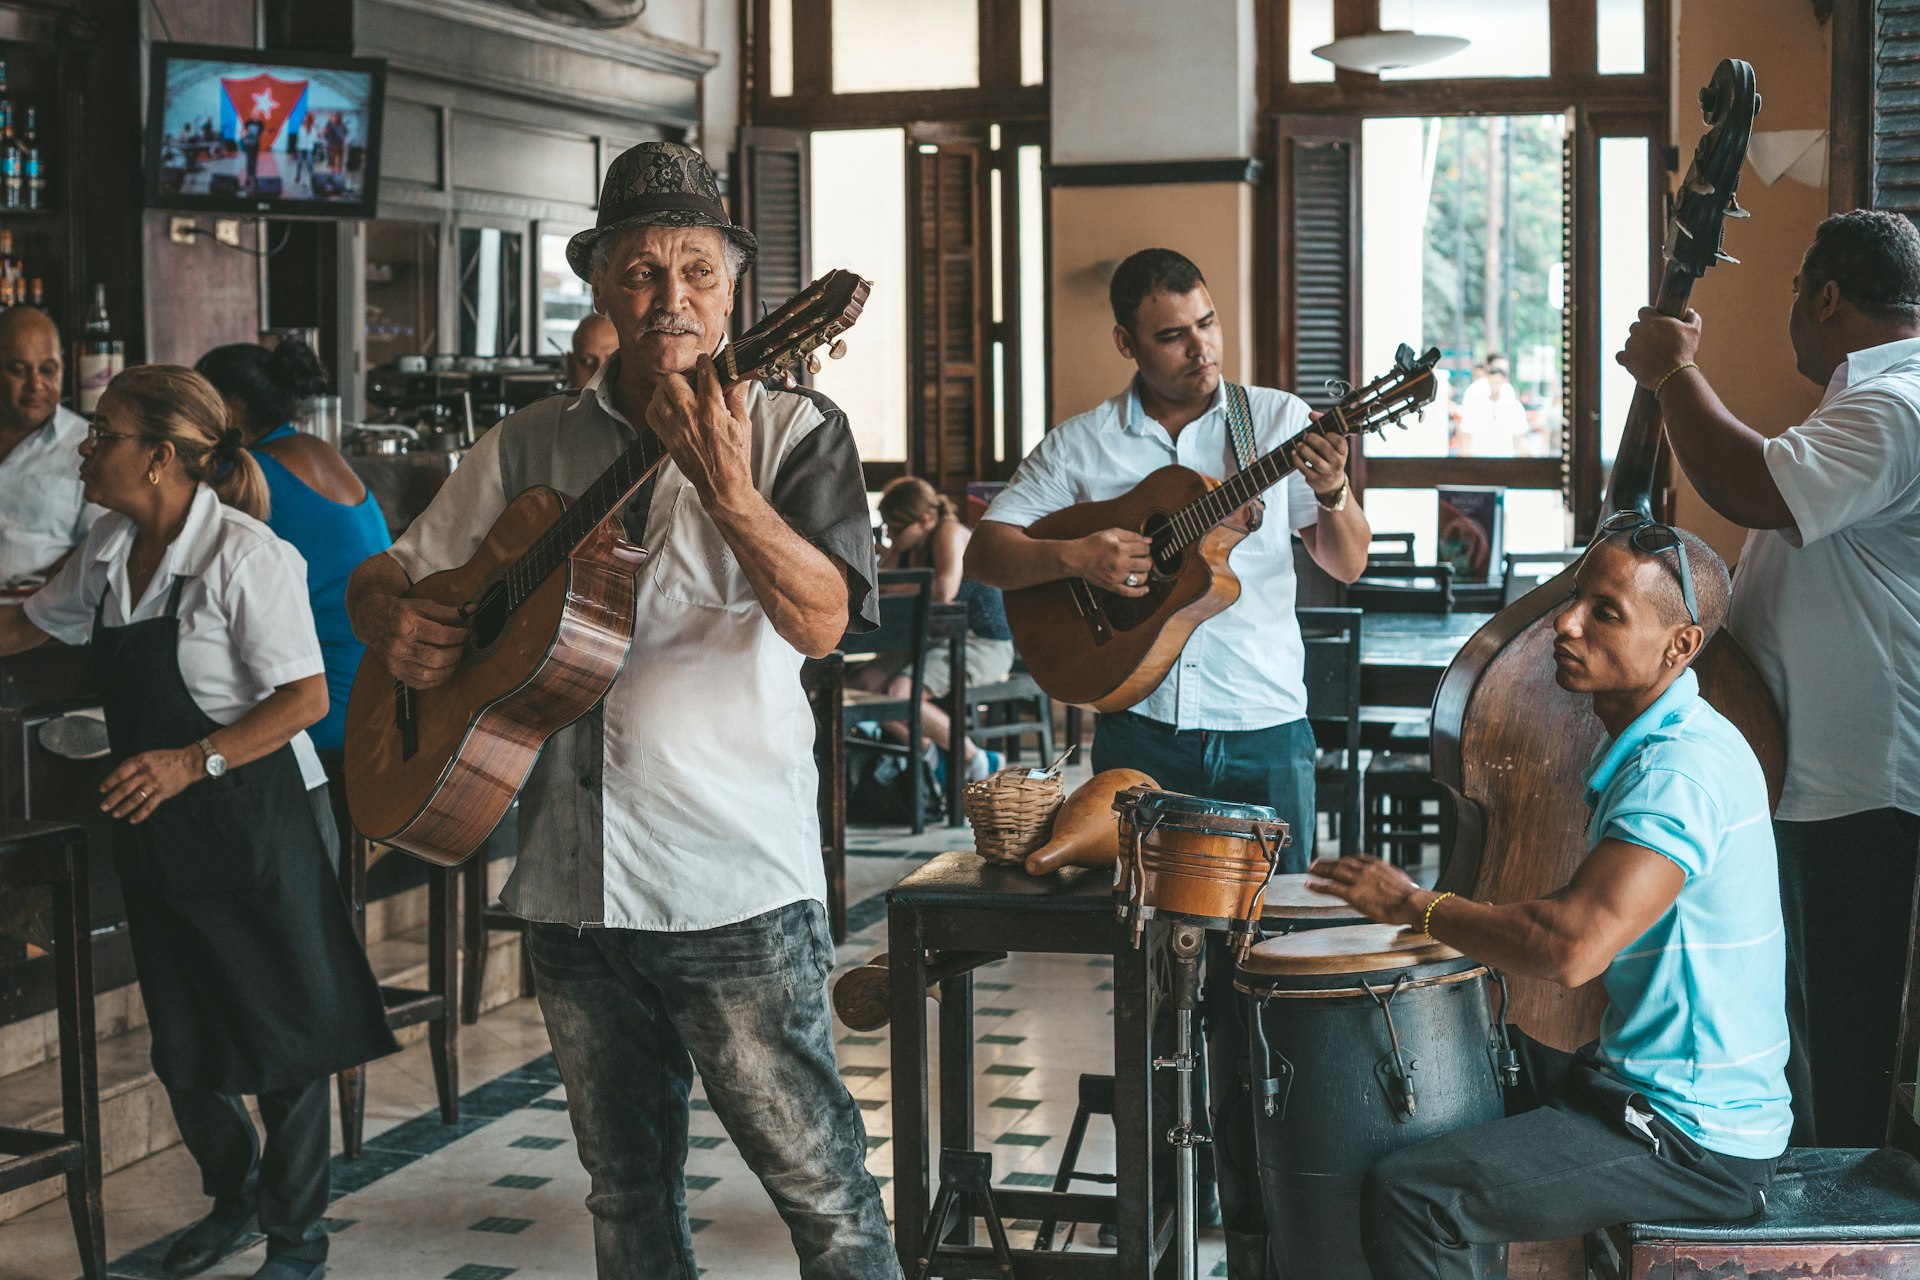 Cuban band performing live music in the bar Dos Hermanos, in Havana Cuba